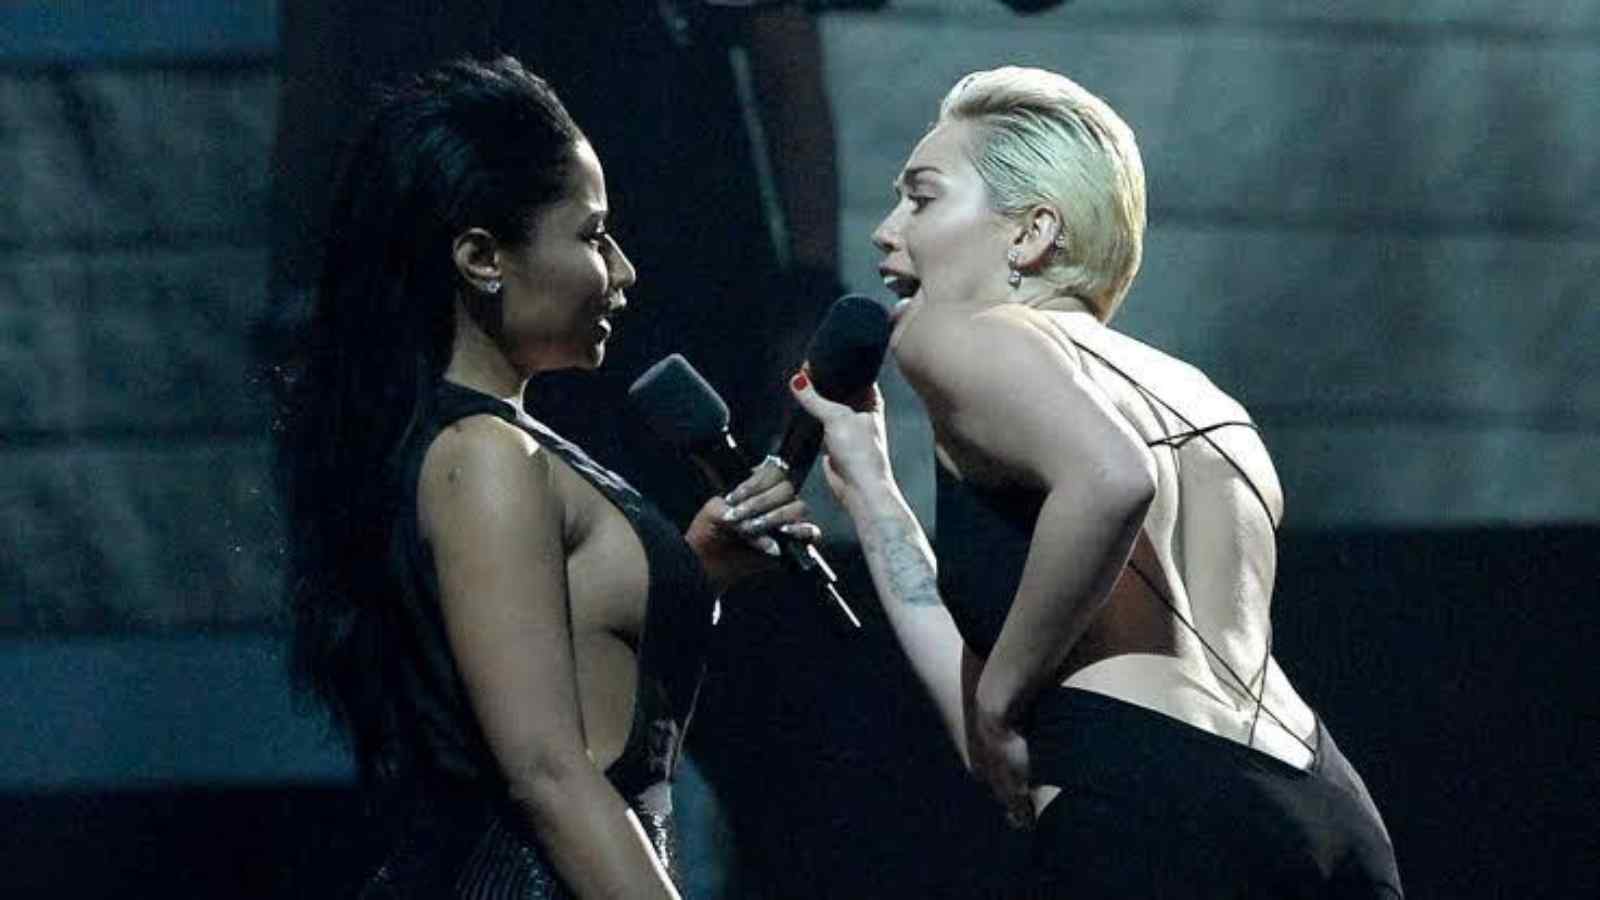 Nicki Minaj and Miley Cyrus's feud during the MTV VMAs was one of the top 15 celebrity feuds